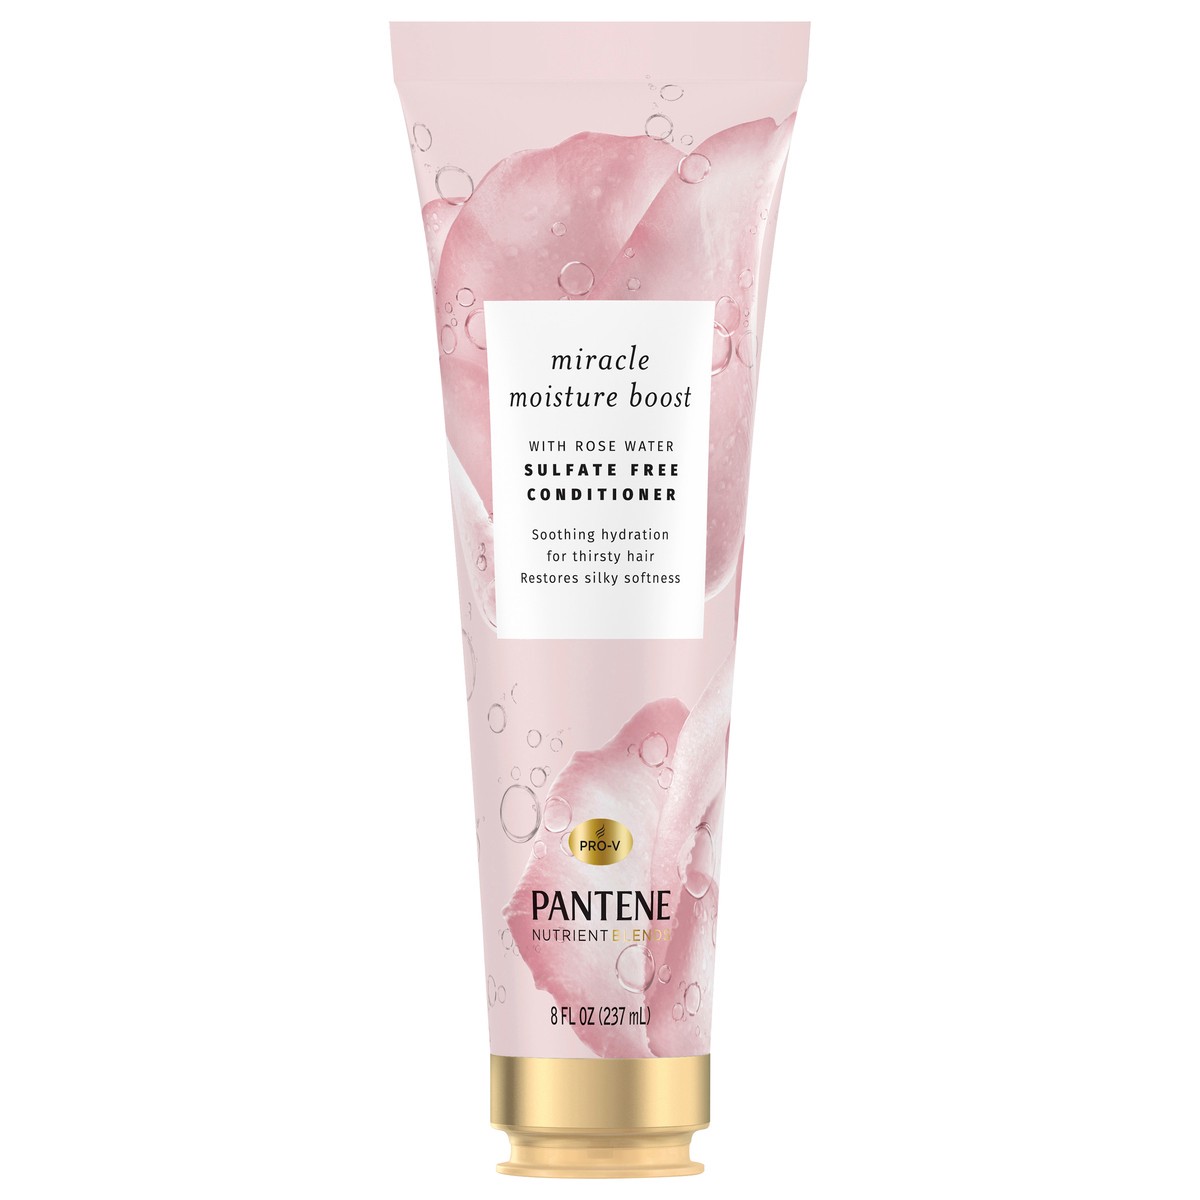 slide 1 of 3, Pantene Pro V Pantene Nutrient Blends Miracle Moisture Boost Rose Water Conditioner for Dry Hair, Sulfate Free, 8.0 fl oz, 8 fl oz